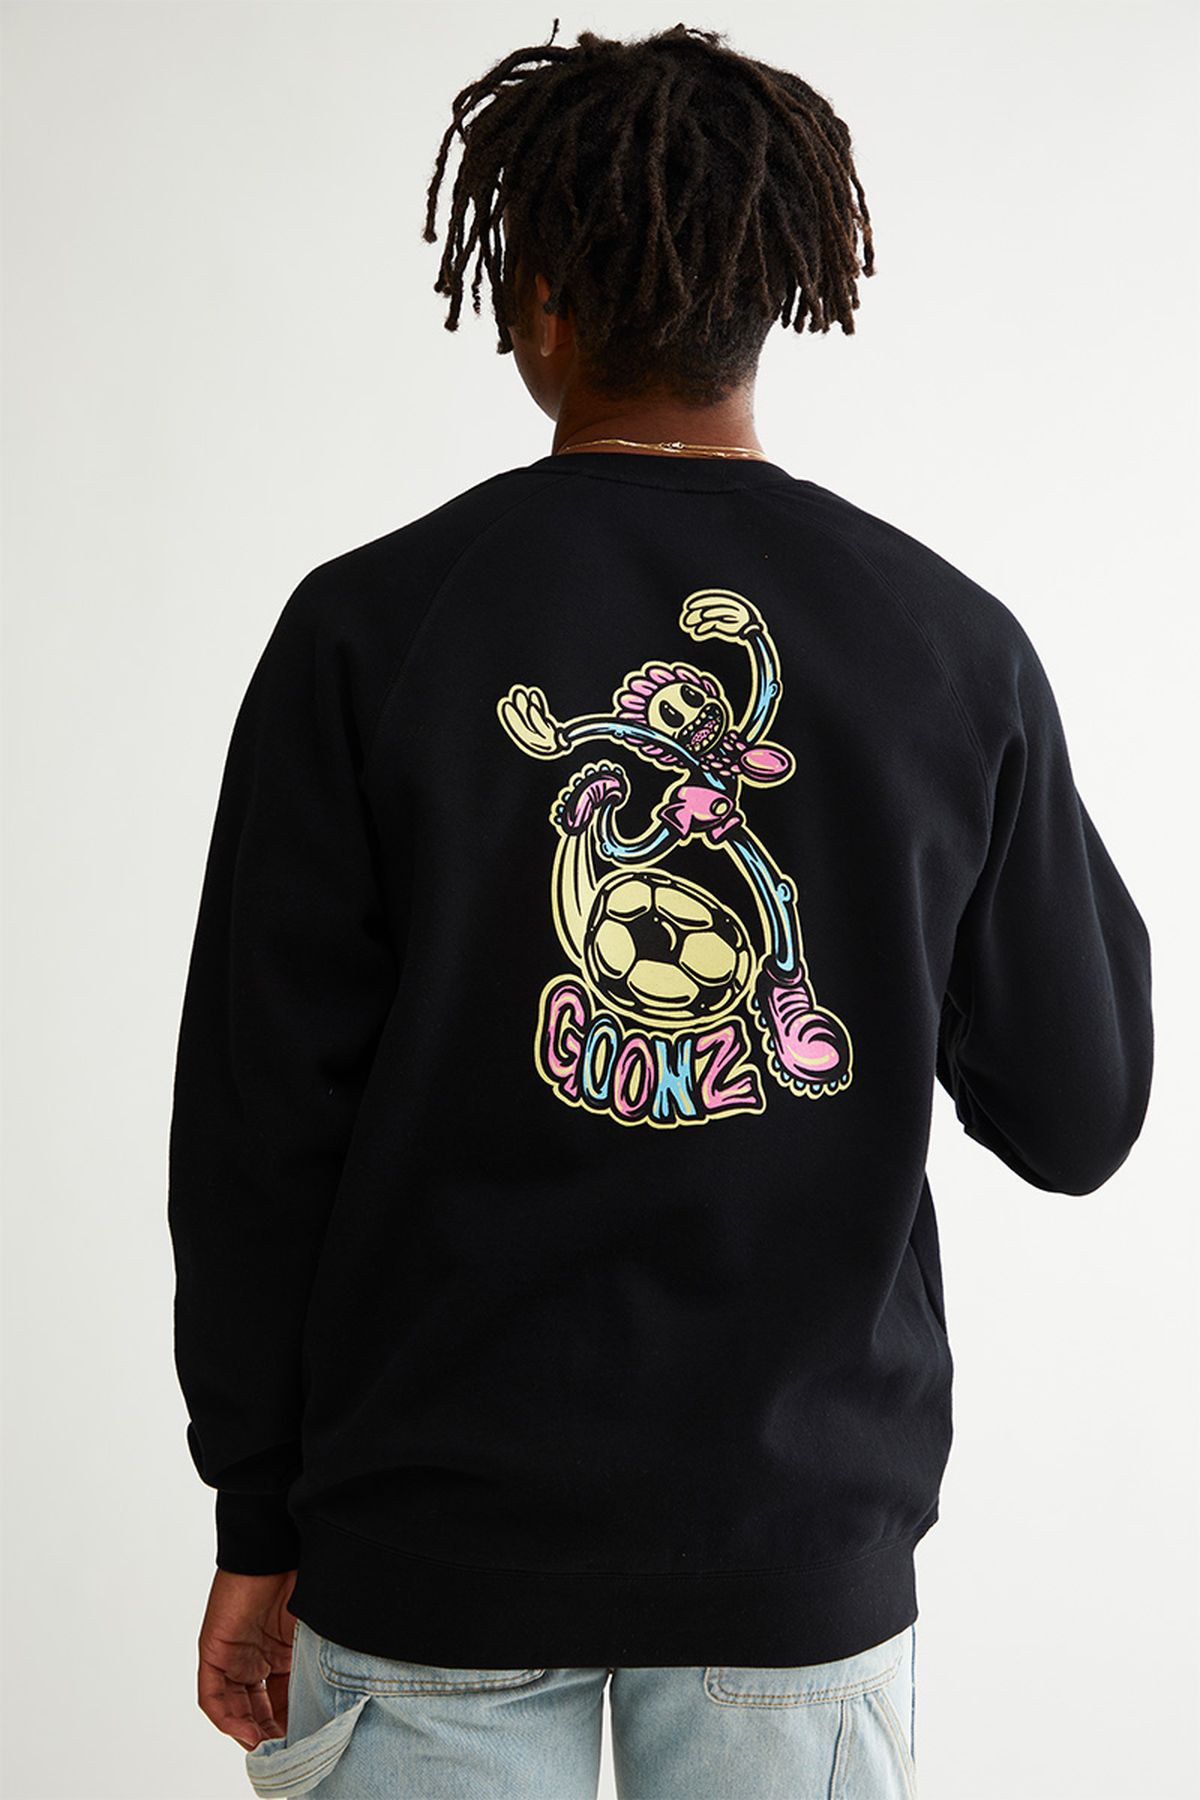 Urban Outfitters x Cryptoon Goonz: NFT & Clothing Collection